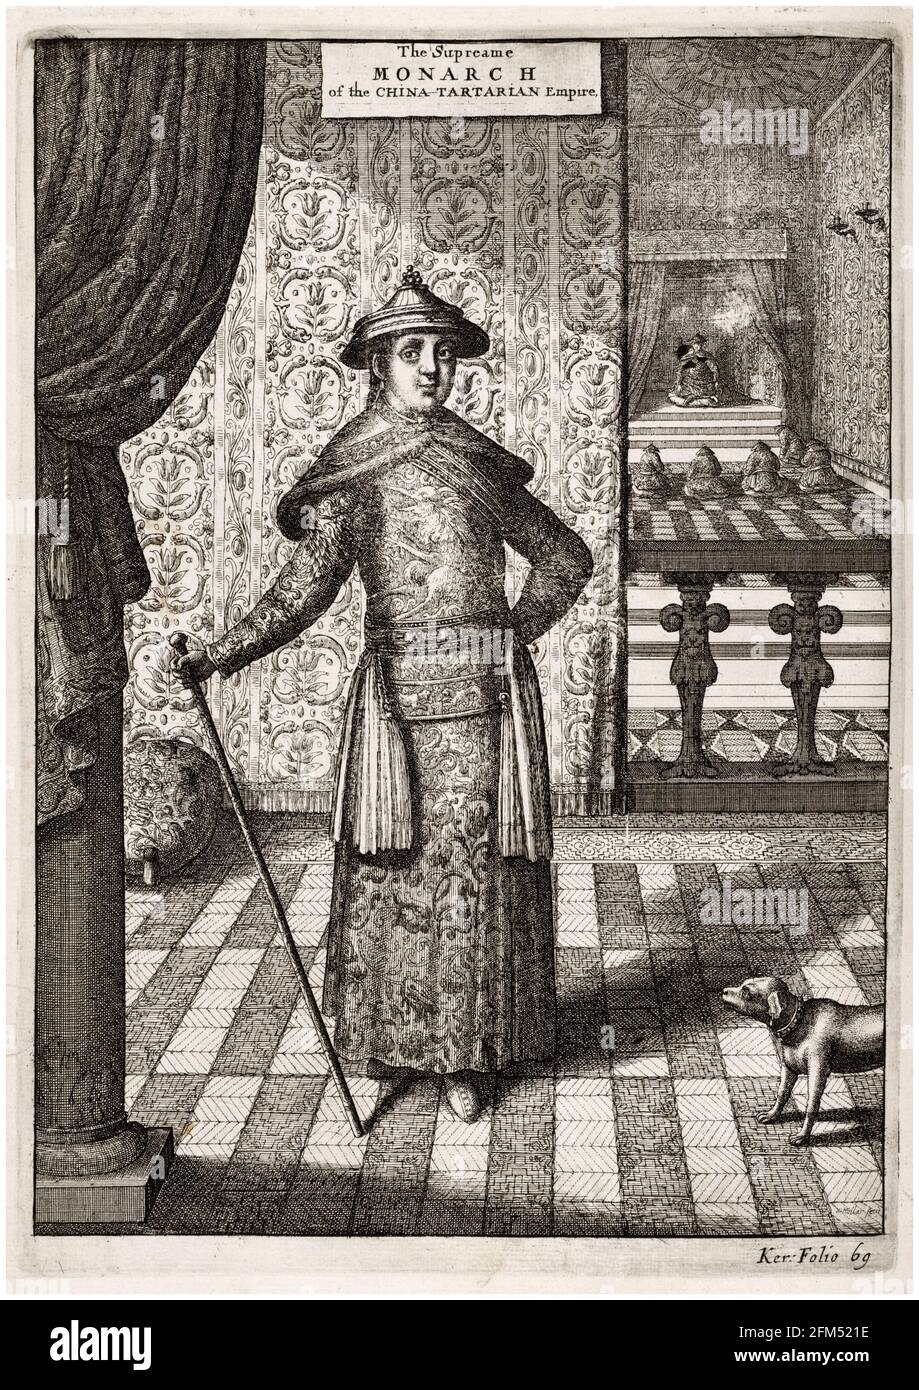 Emperor of China: from the book An Embassy from the East-India Company of the United Provinces to the Grand Tartar Cham, Emperor of China, by Johannes Nieuhof, engraving by Wenceslaus Hollar, 1669 Stock Photo